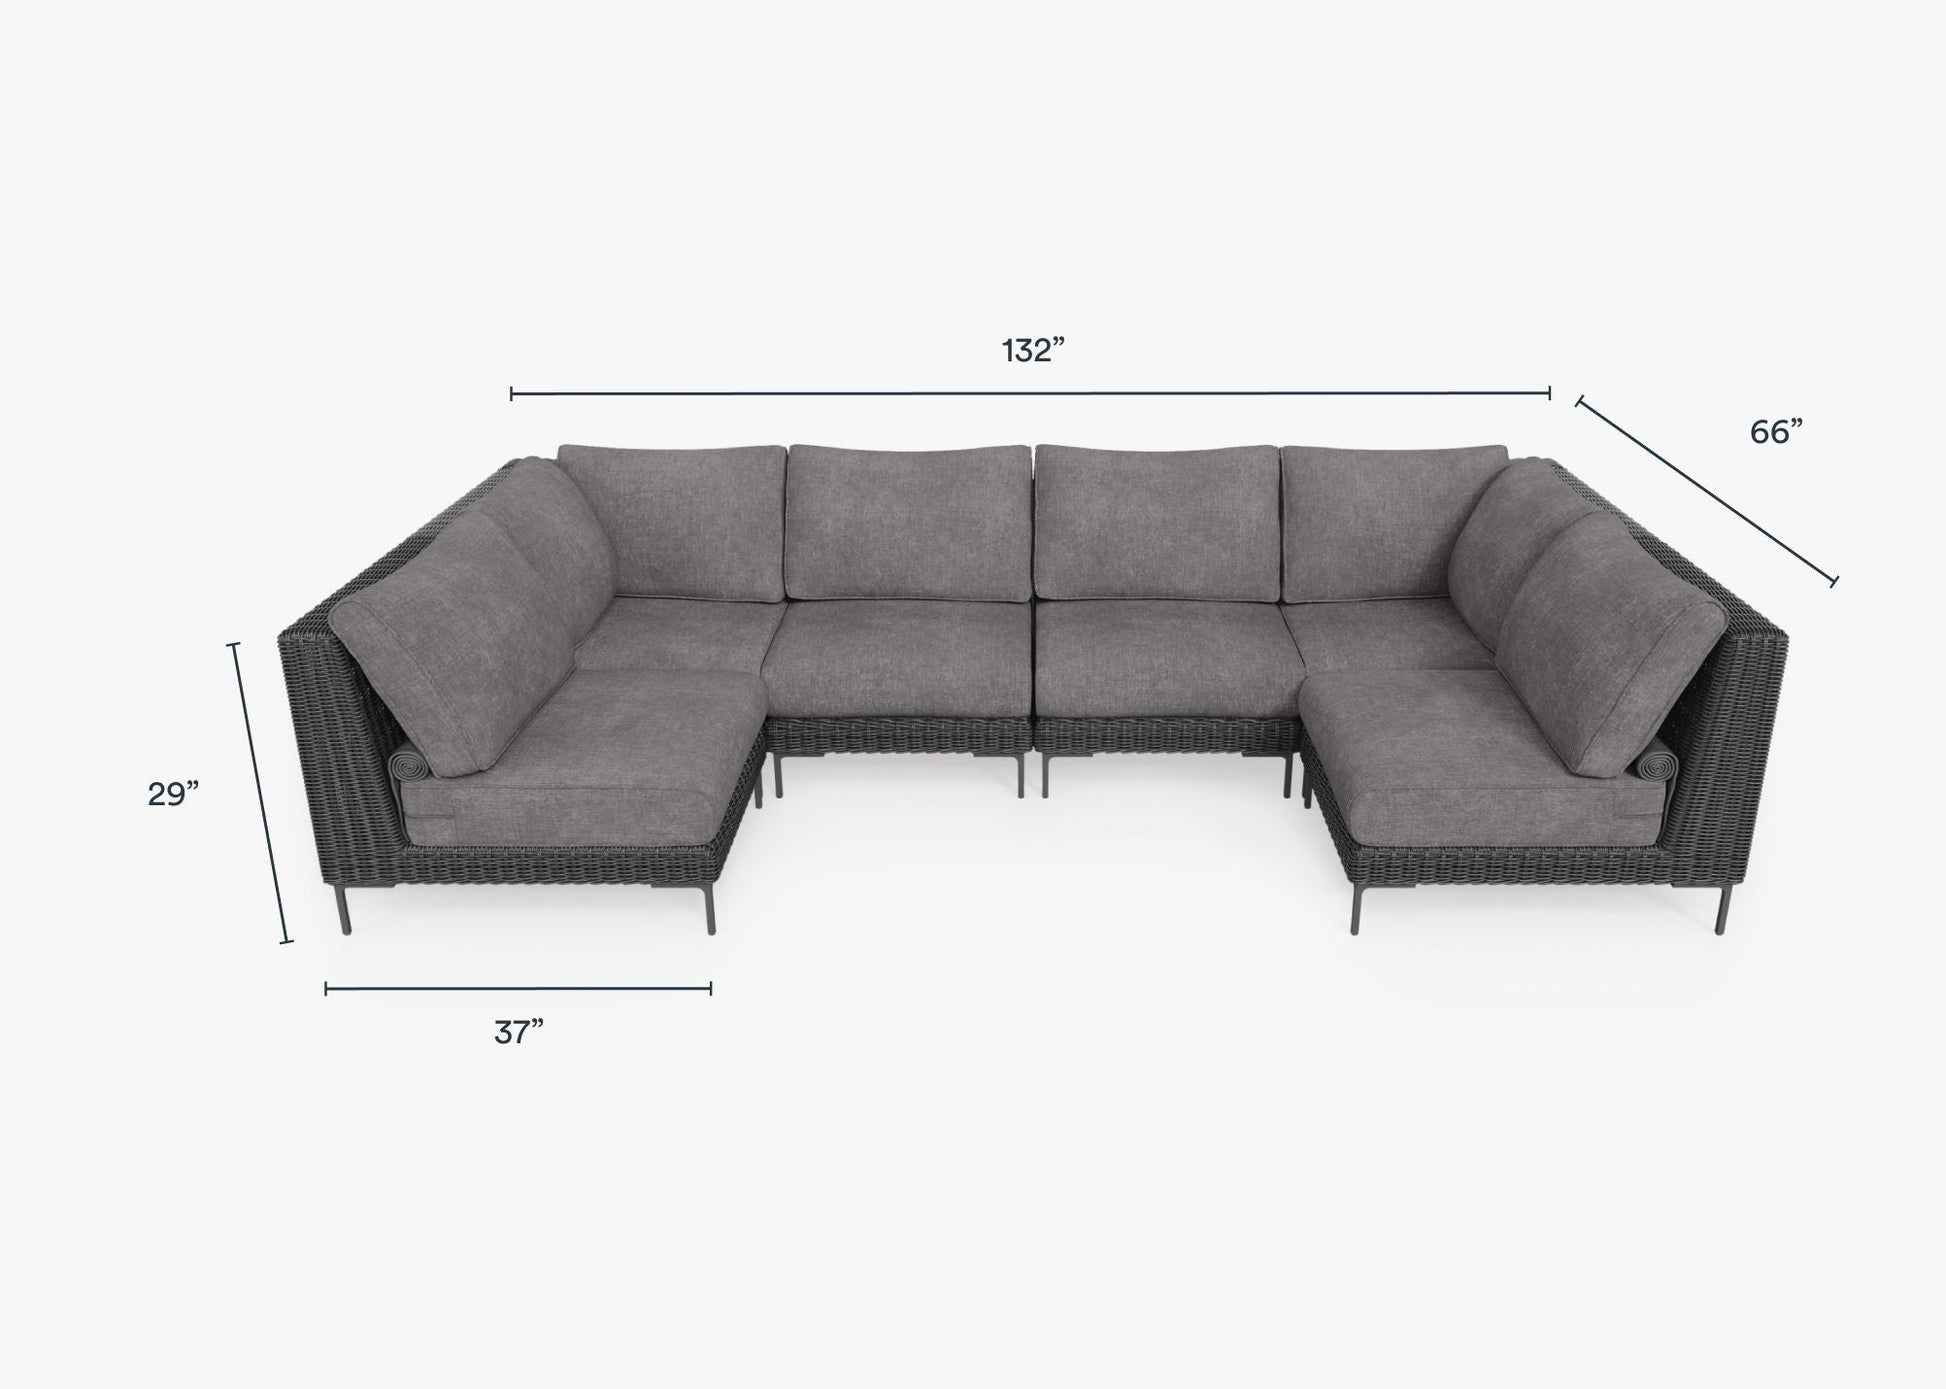 Live Outer 132" x 66" Black Wicker Outdoor U Sectional 6-Seat With Dark Pebble Gray Cushion